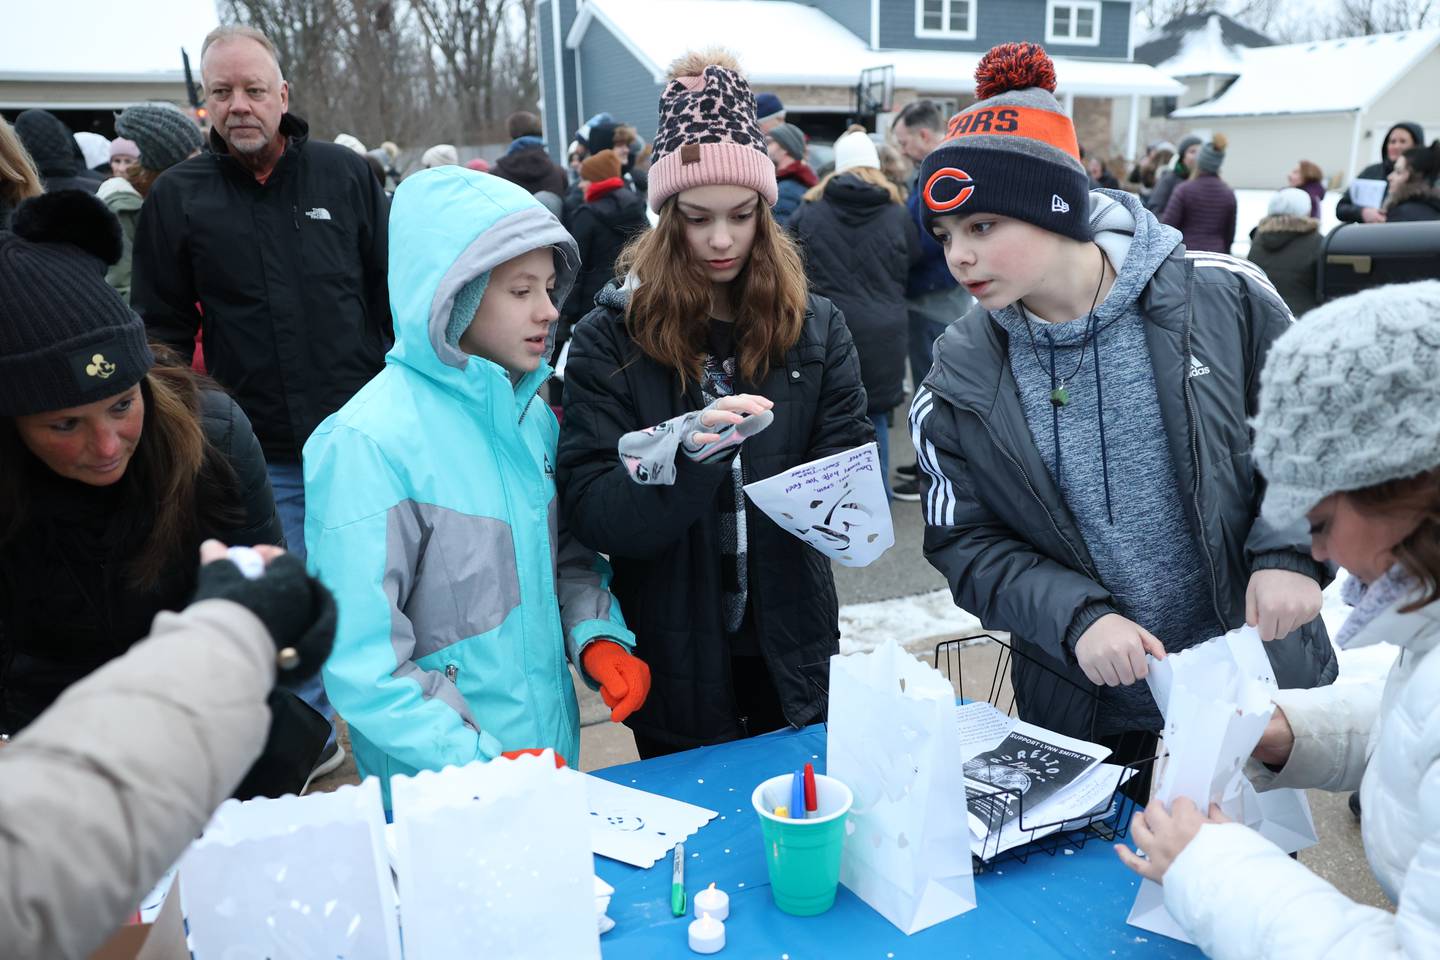 Talia Carver (center), a student of Lynn Smith, writes words of encouragement on a lantern for her teacher along with her friend Libby Atwook and brother Gavin. Hundreds came out to show support as Lynn Smith is battling cancer.